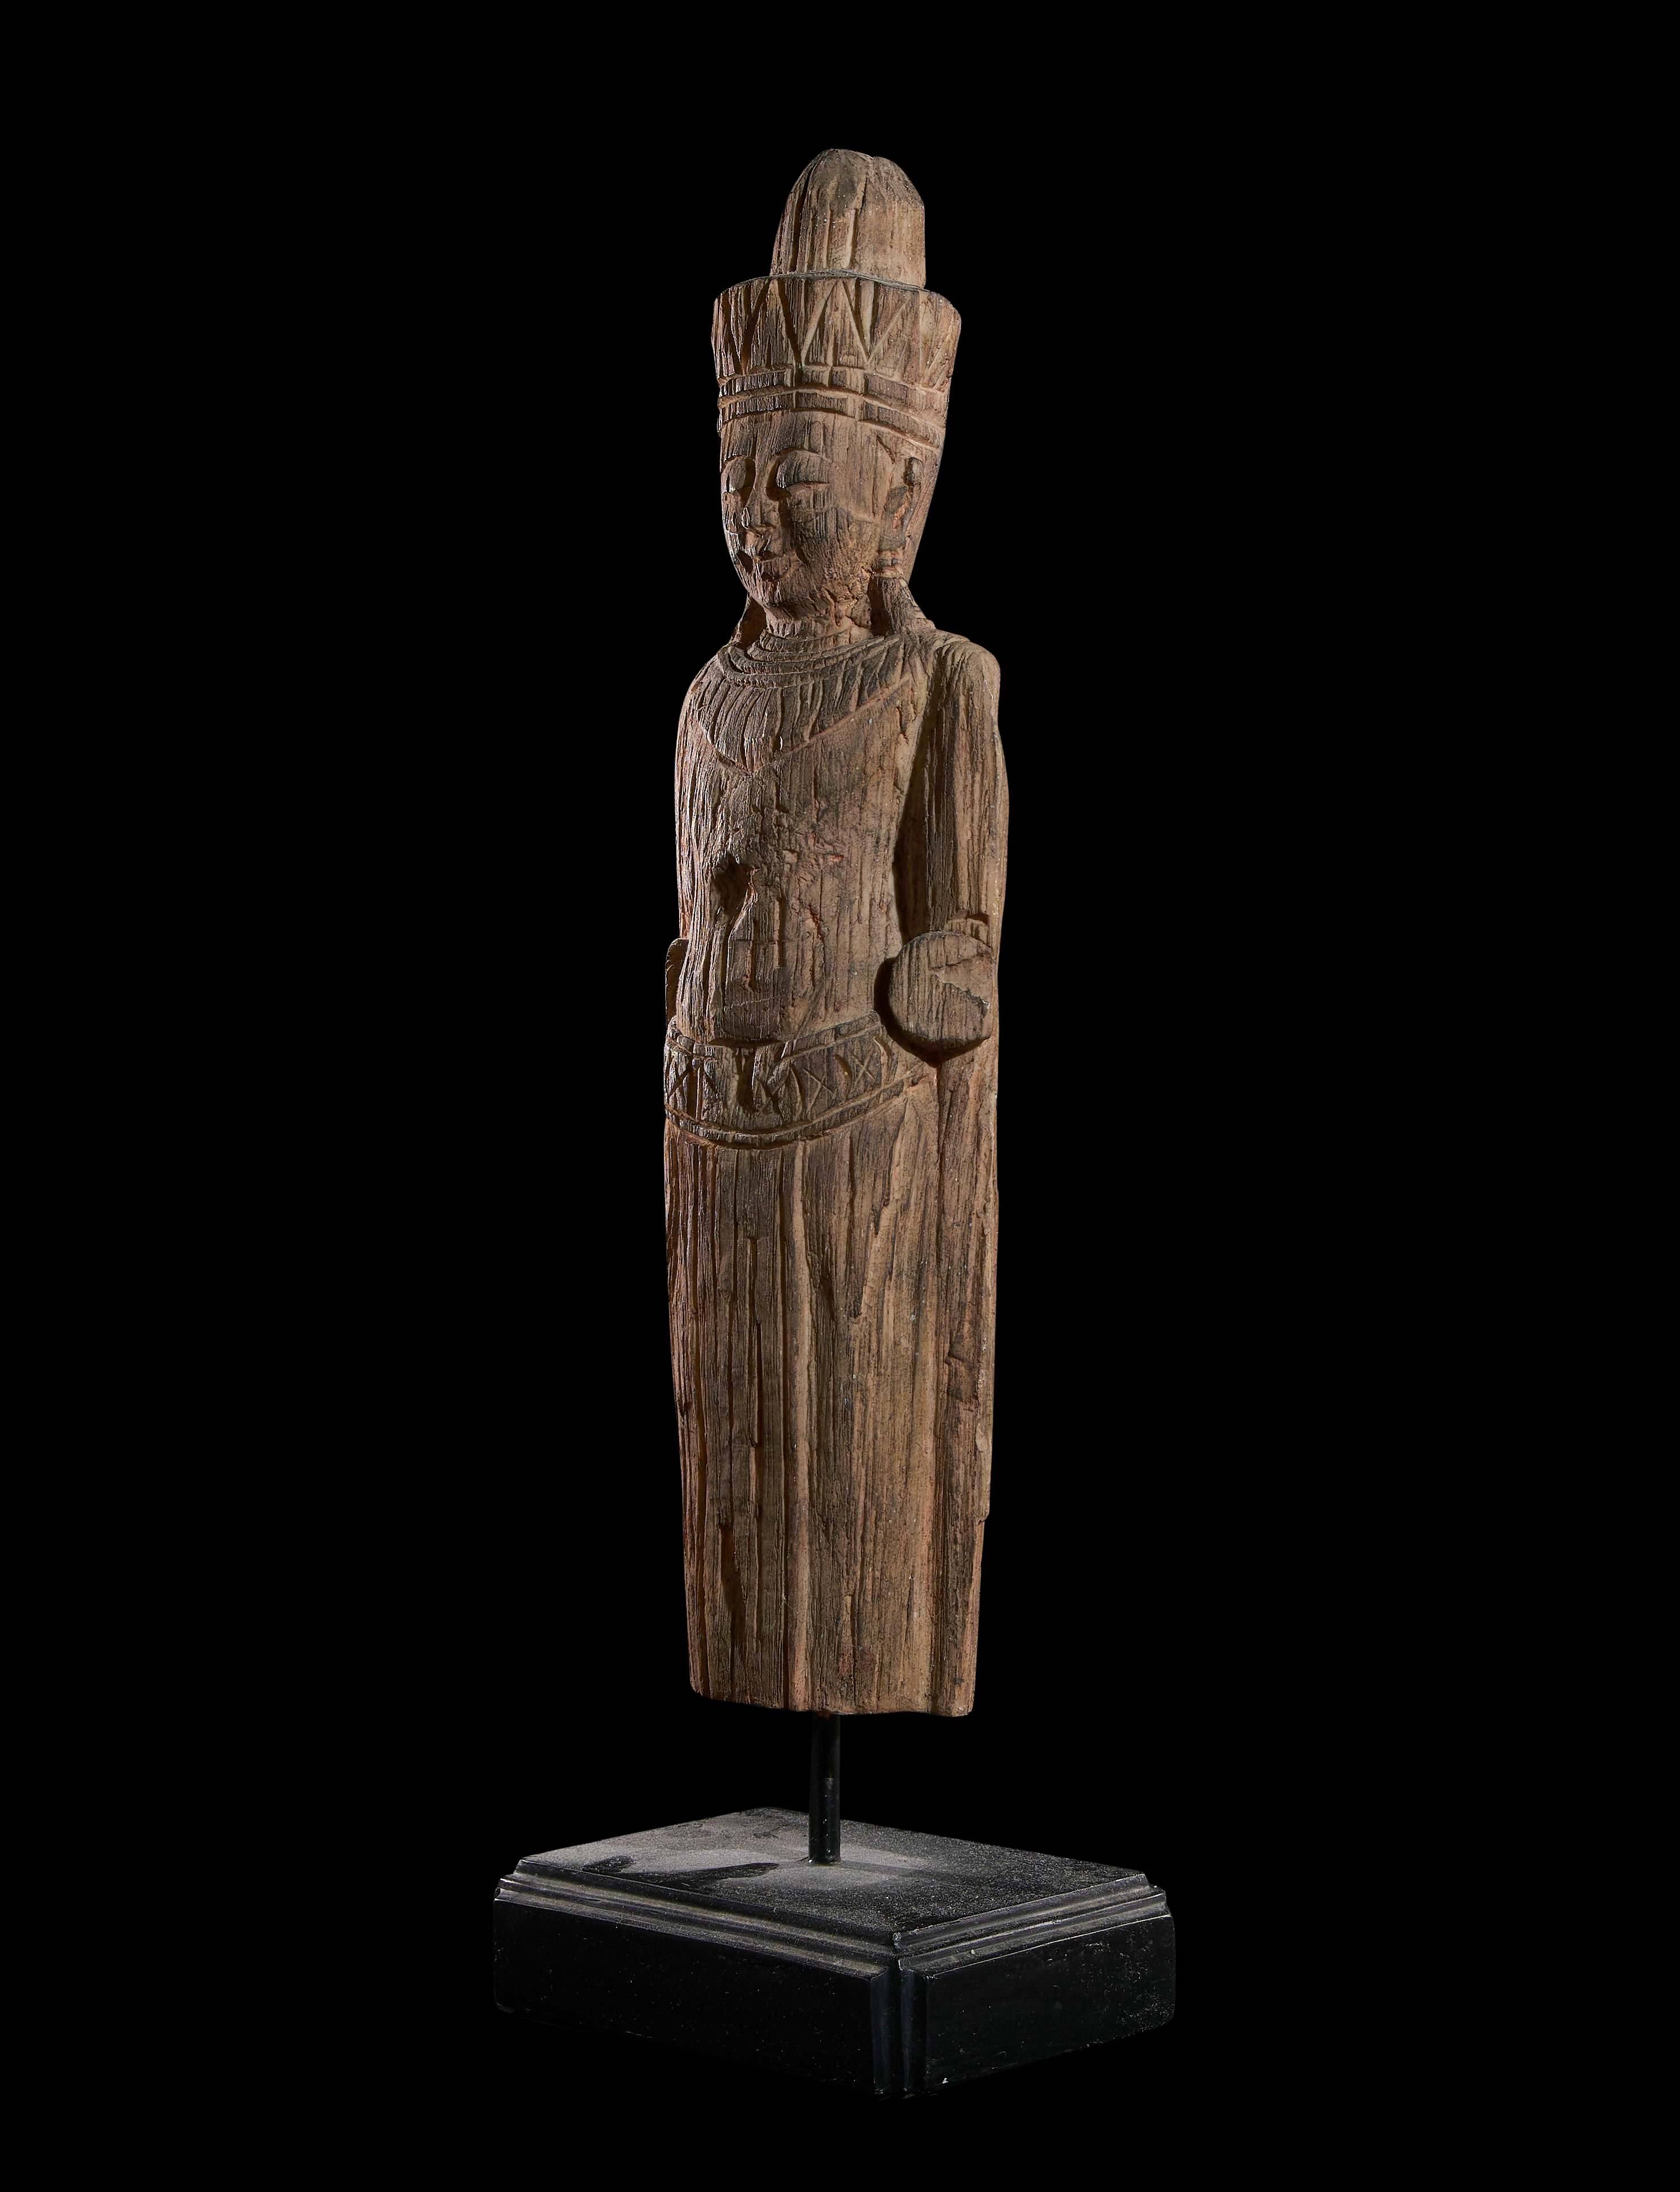 A CARVED KHMER WOODEN FIGURE, PROBABLY 13TH CENTURY - Image 4 of 4